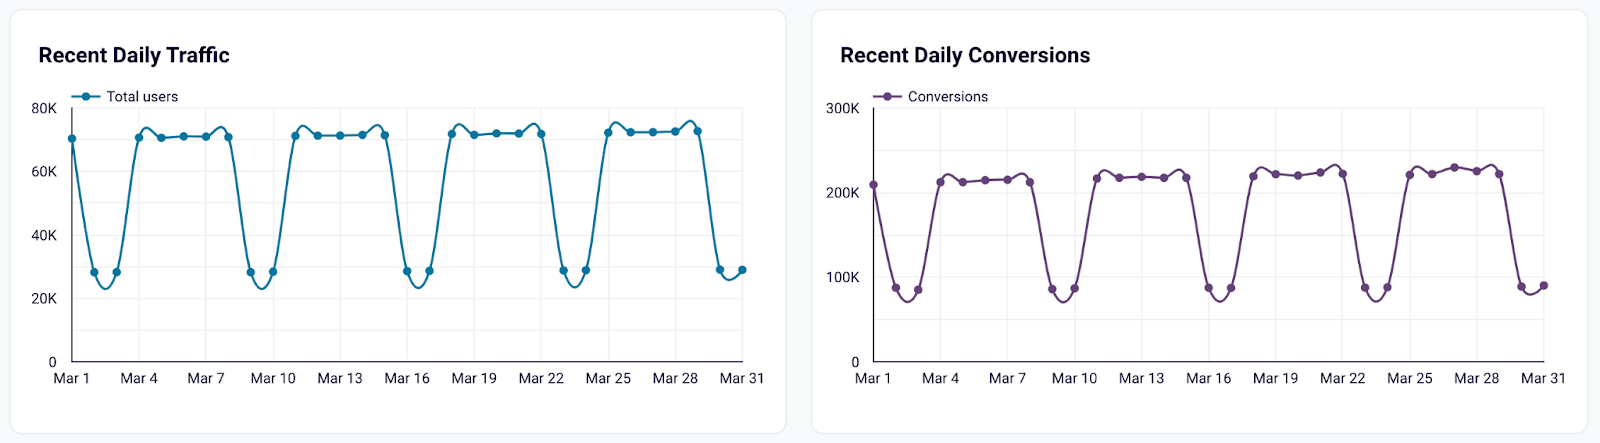 2.15 daily traffic and conversions